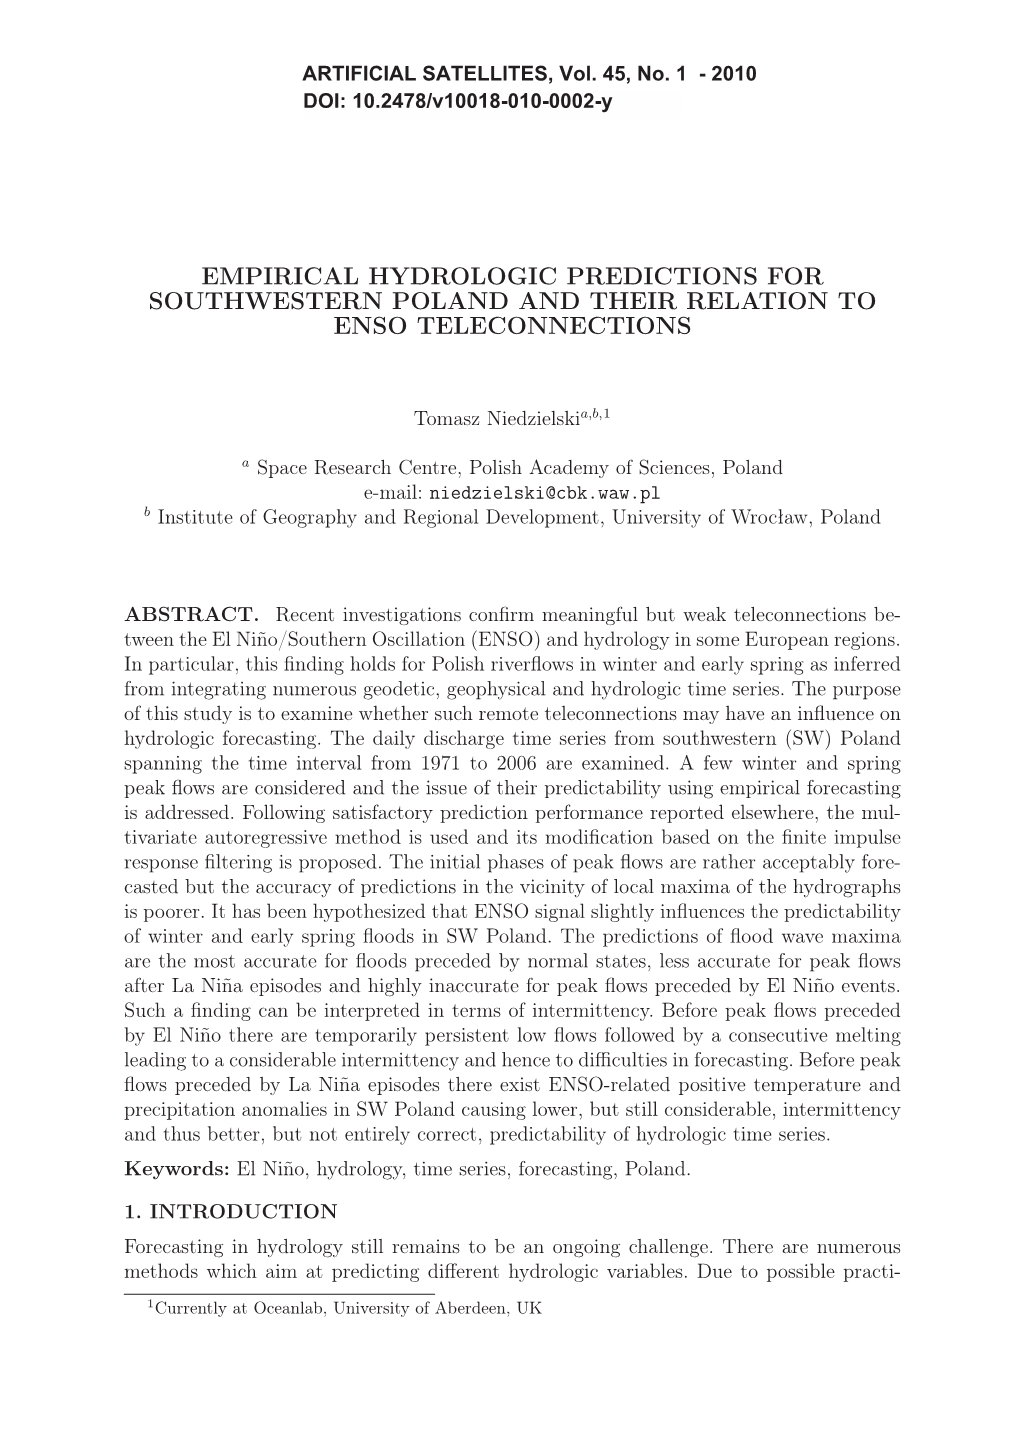 Empirical Hydrologic Predictions for Southwestern Poland and Their Relation to Enso Teleconnections